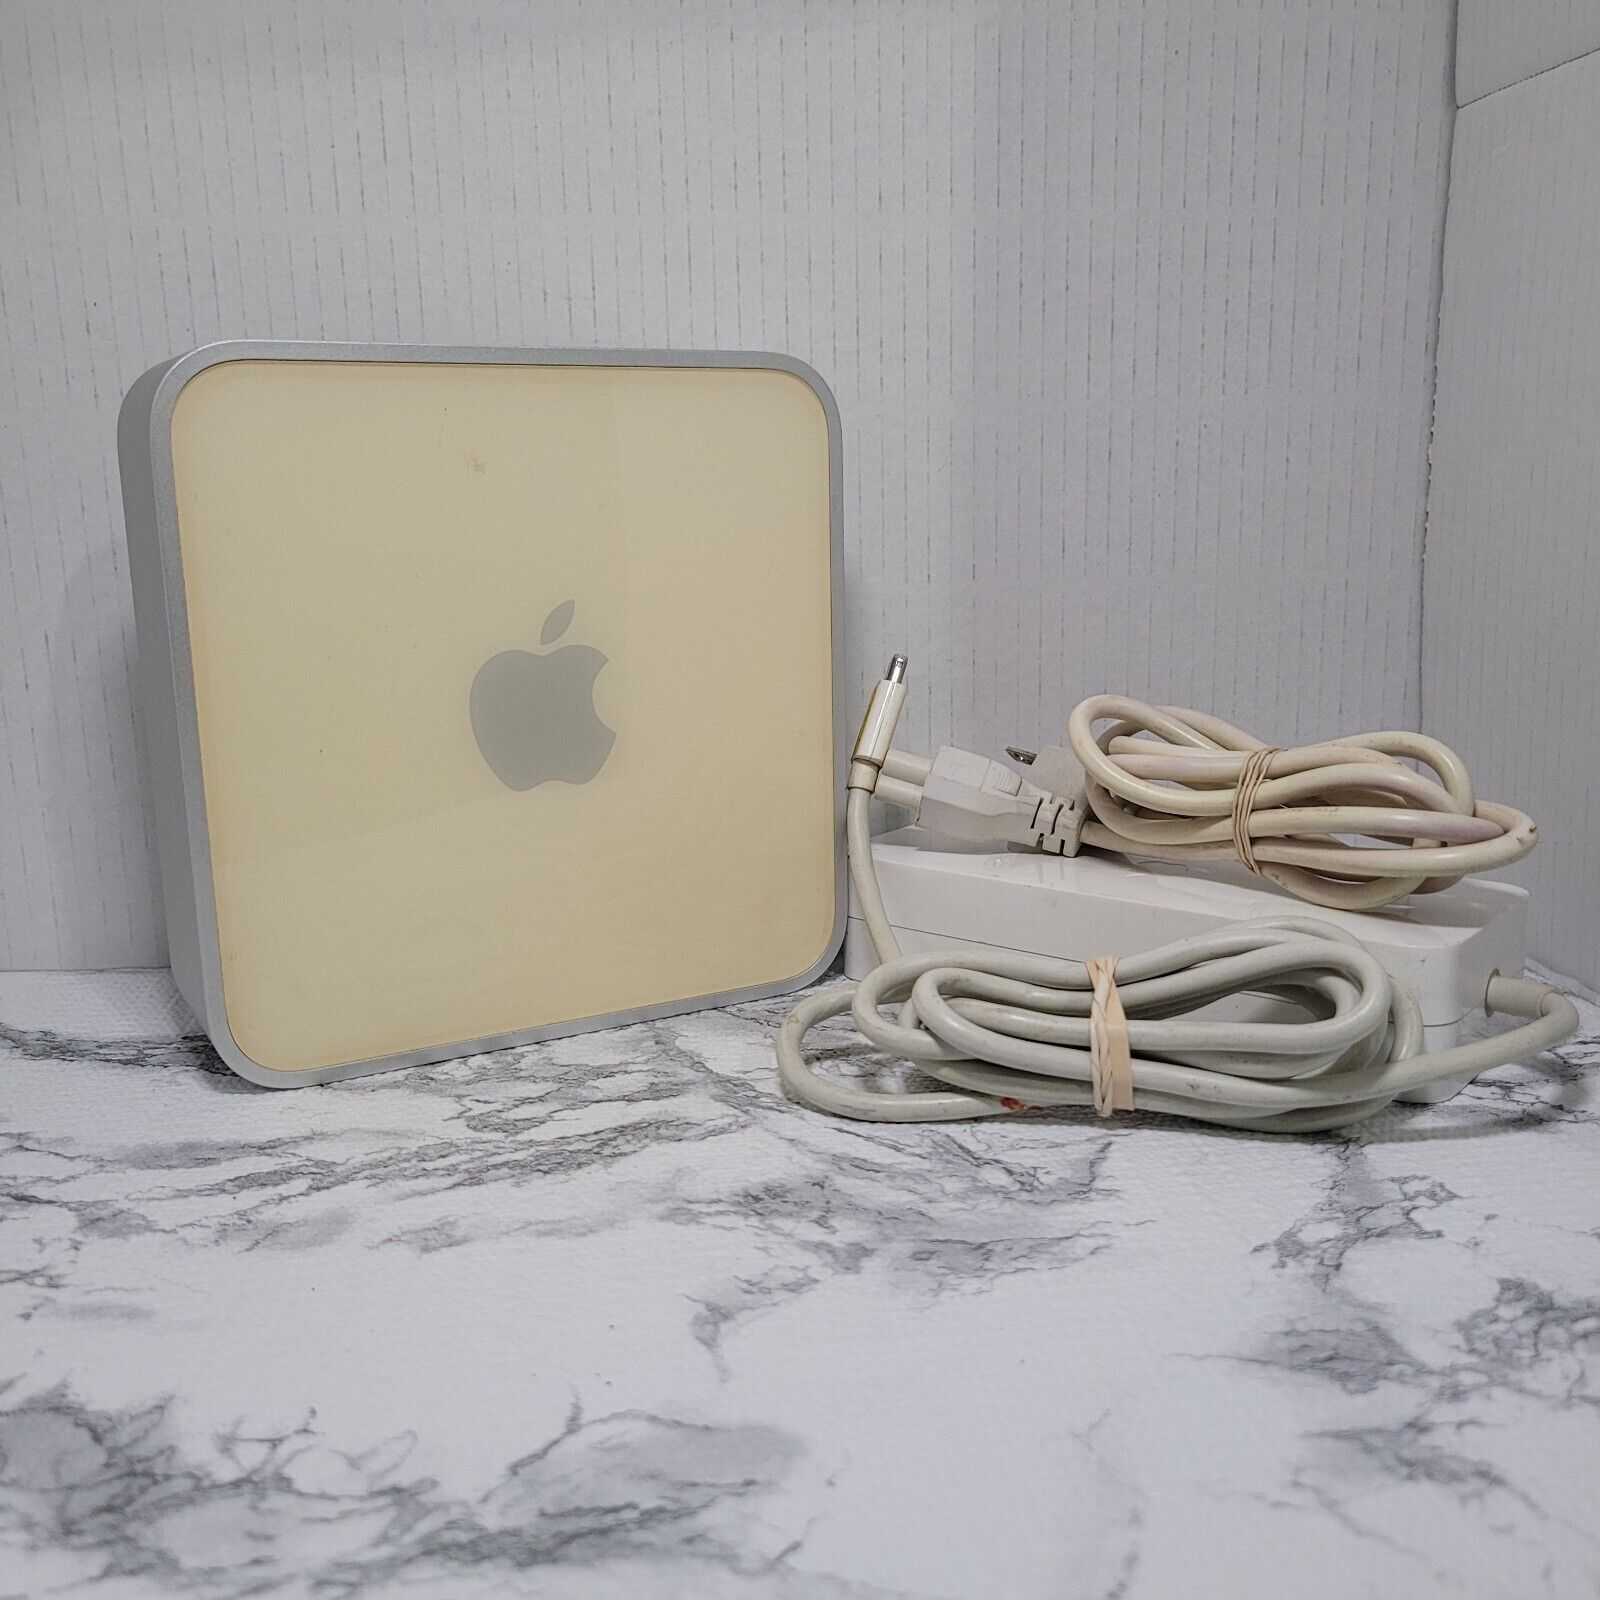 Apple A1103 Mac Mini G4 2005 w/ Power Adapter 80GB Tested And Working